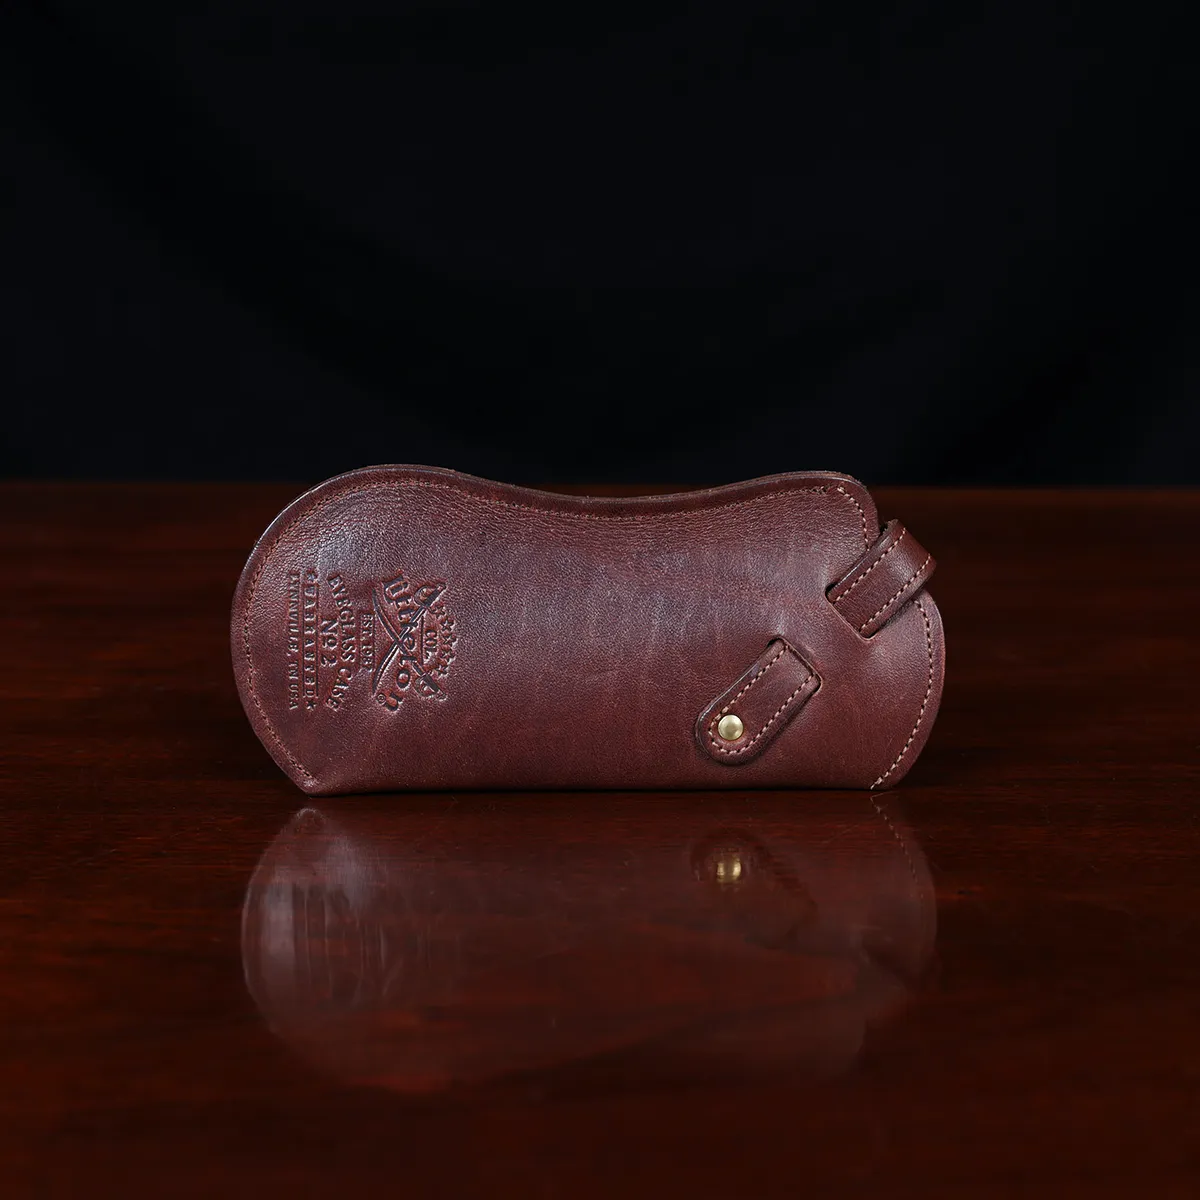 Brown leather No. 2 Eyeglass Case on top of a wooden table with a dark background - back view